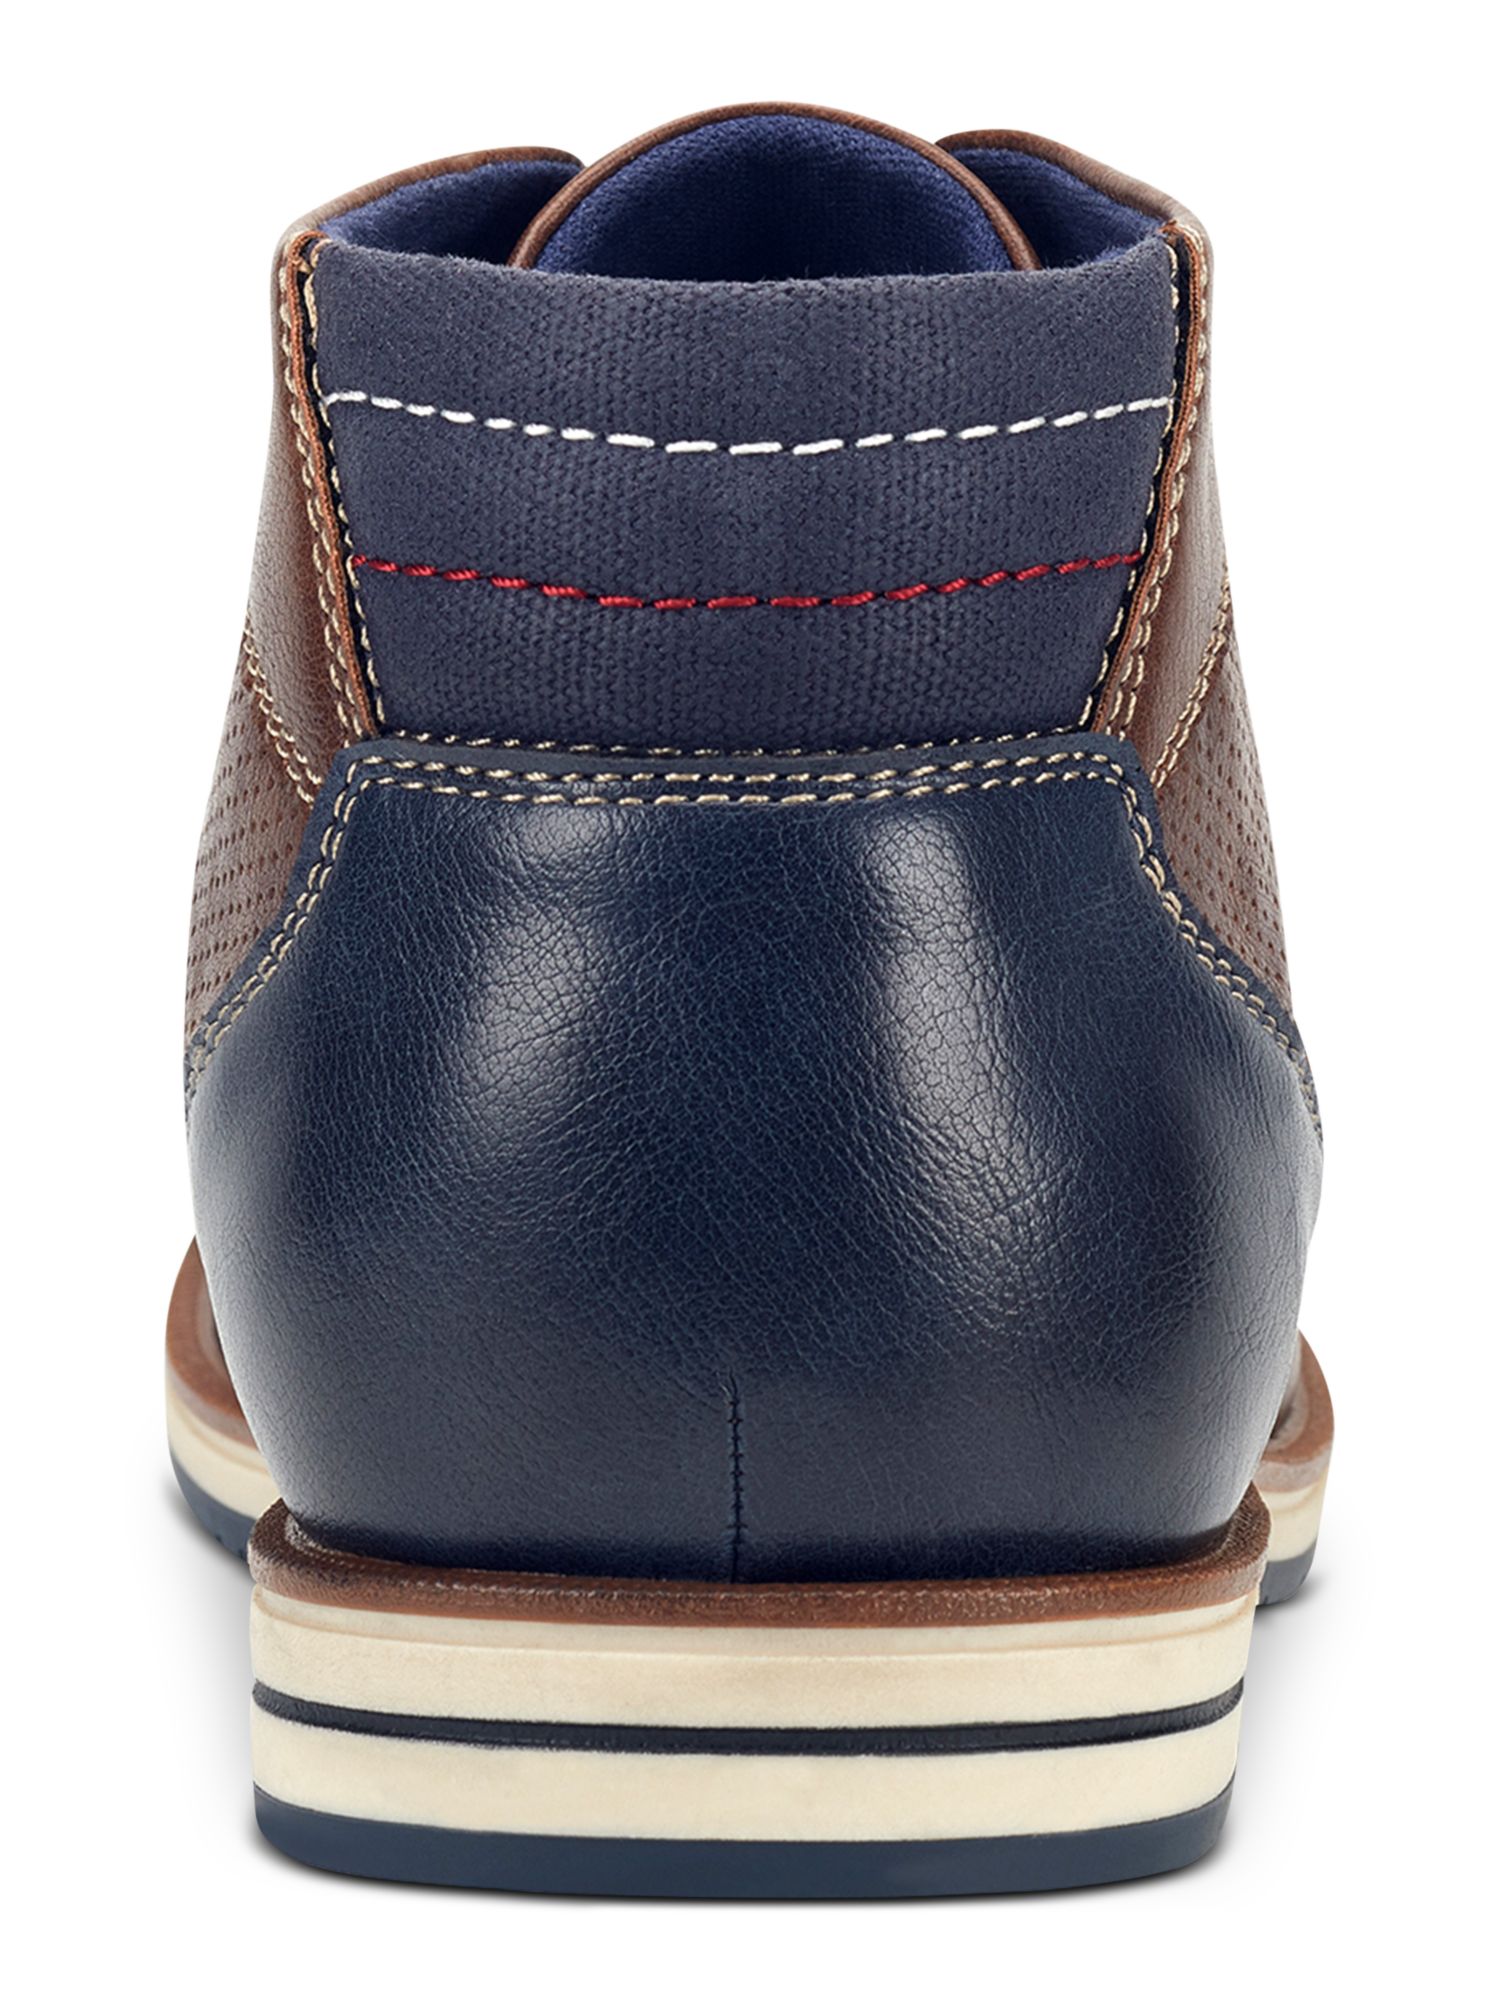 TOMMY HILFIGER Mens Brown Cushioned Comfort Ulan Round Toe Platform Lace-Up Chukka Boots 11.5 M - image 3 of 4